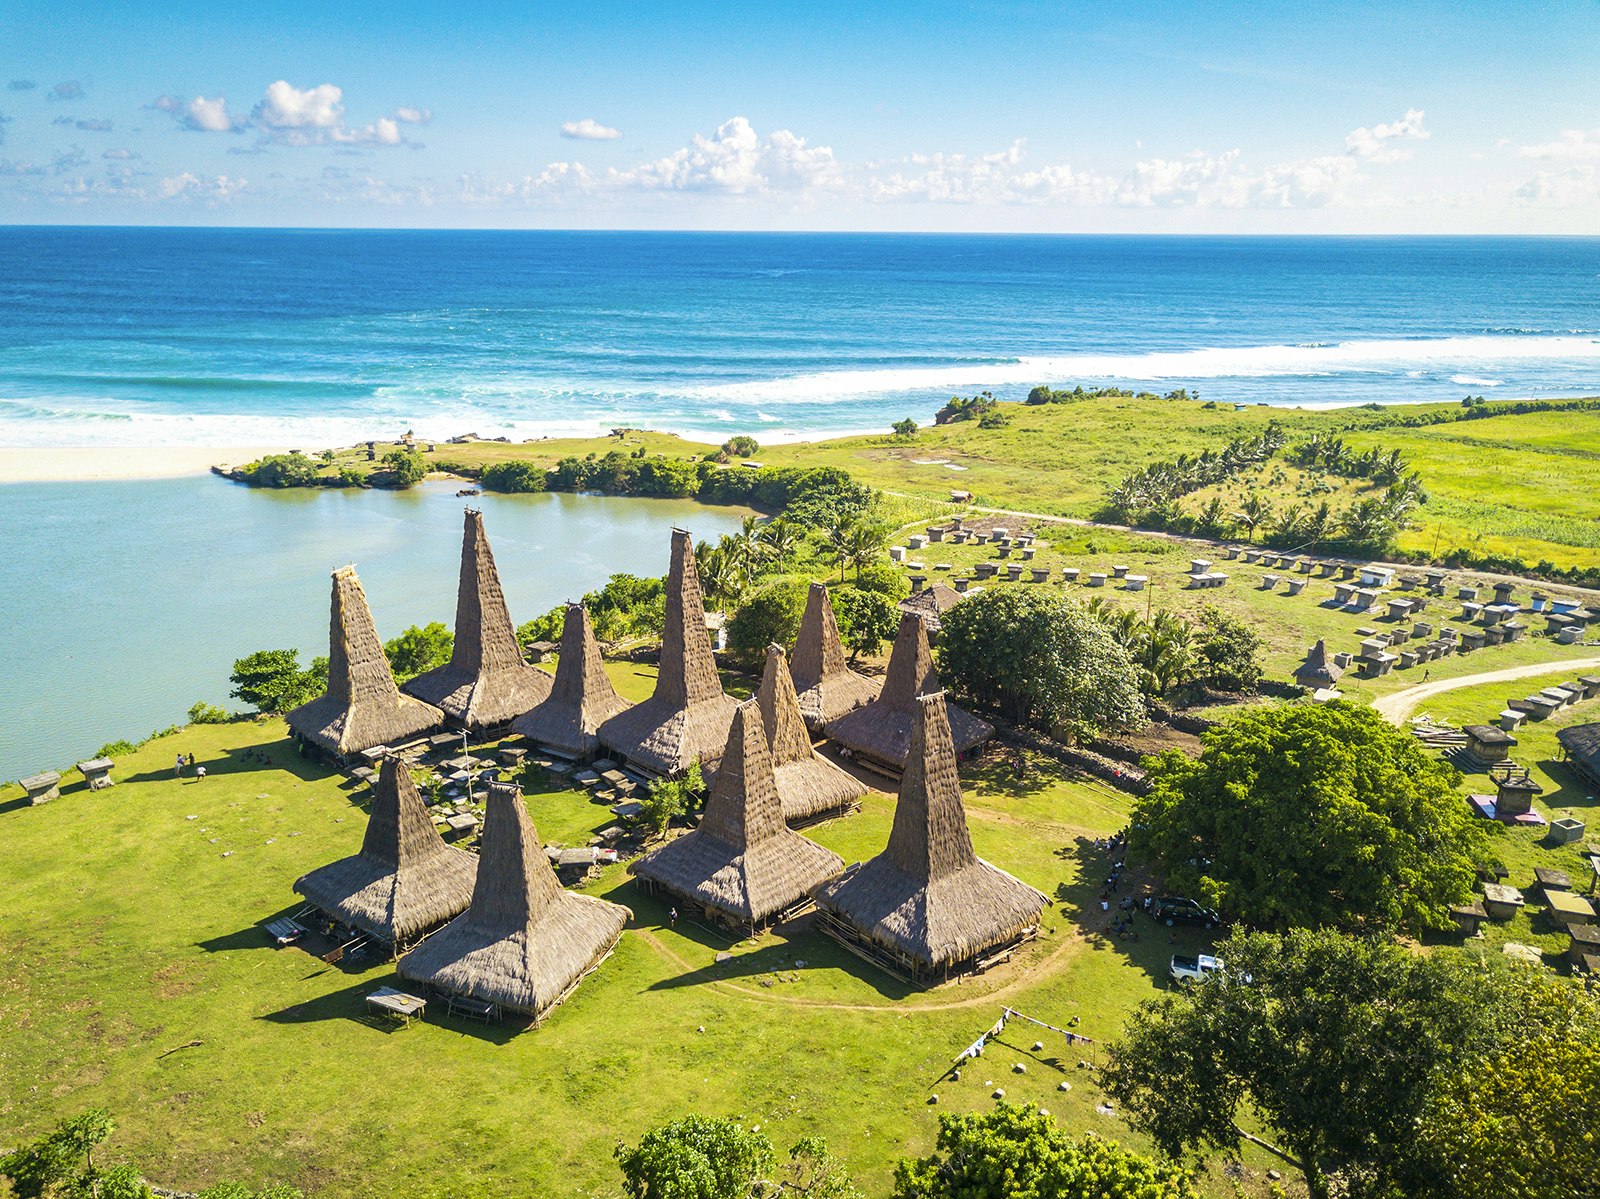 An aerial view of the traditional Indonesian village Ratenggaro; the buildings have pyramid-like roofs, and the community is backed by shoreline. East Nusa Tenggara, Indonesia.